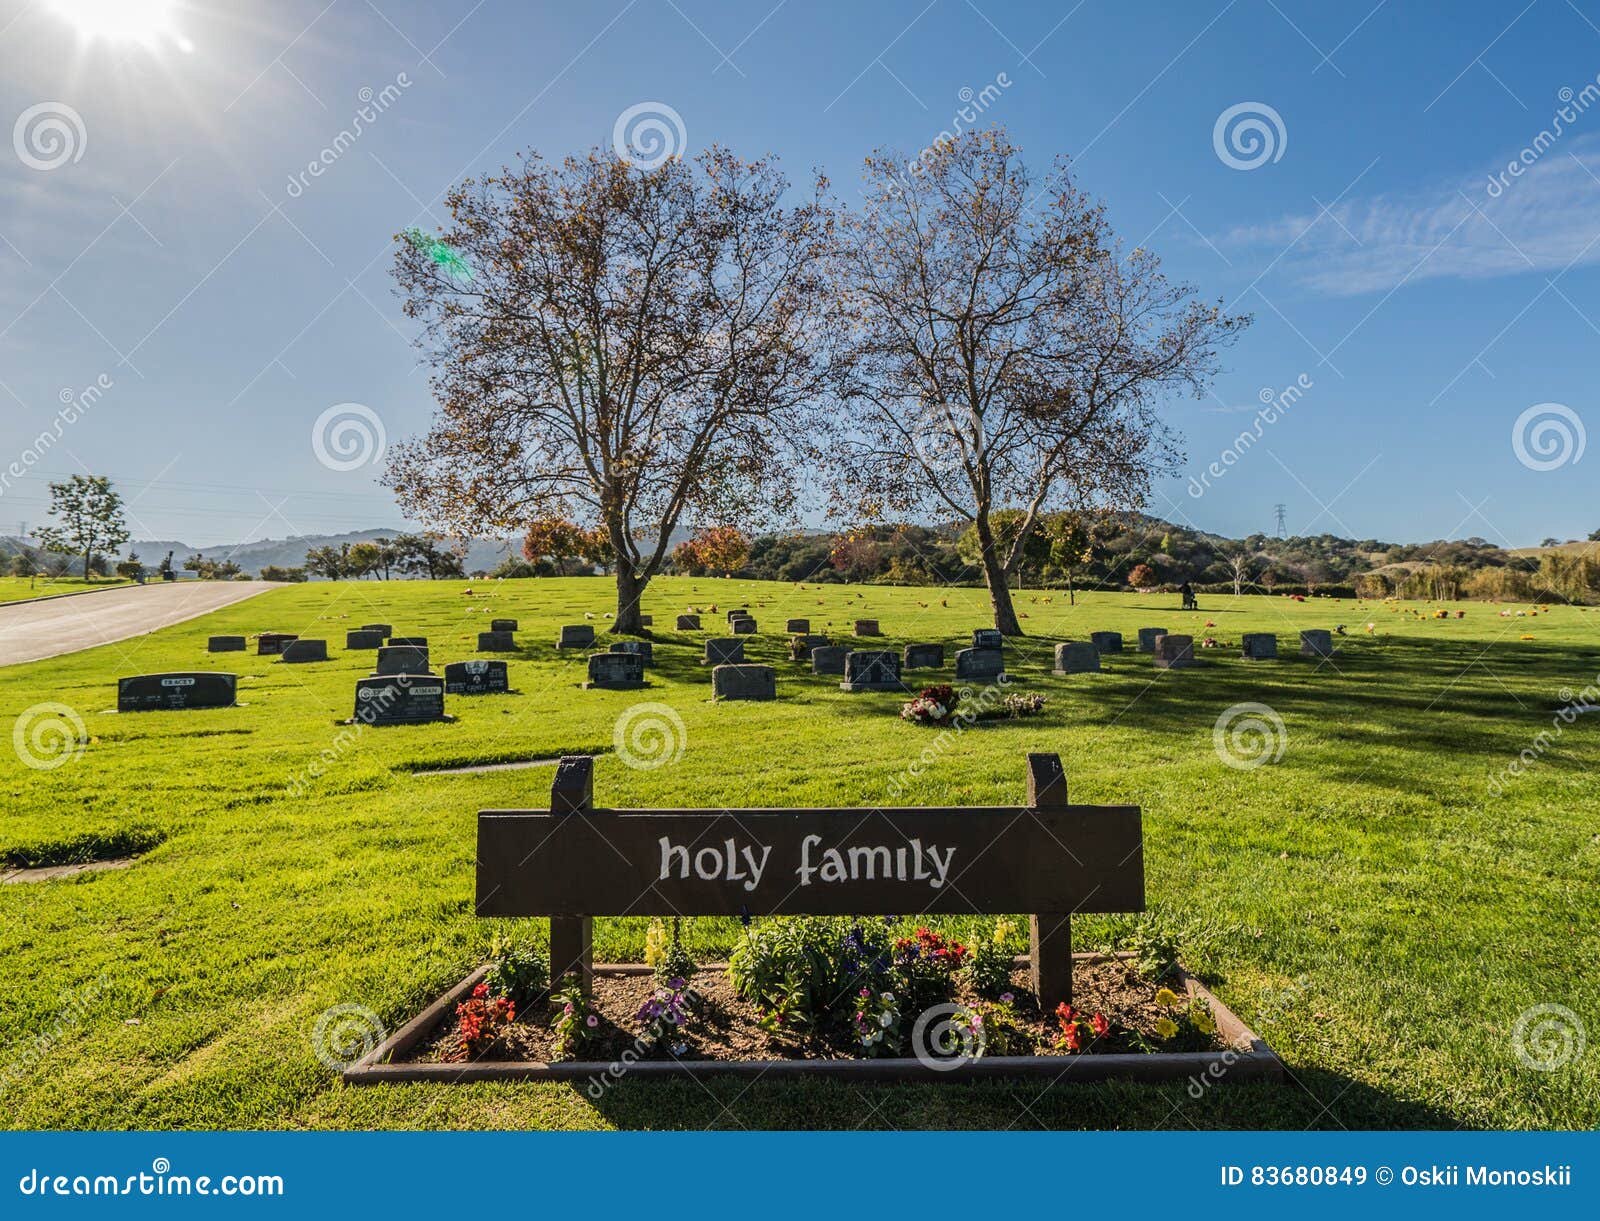 Cemetery In Bright Day Light Stock Image Image Of Gate Holy